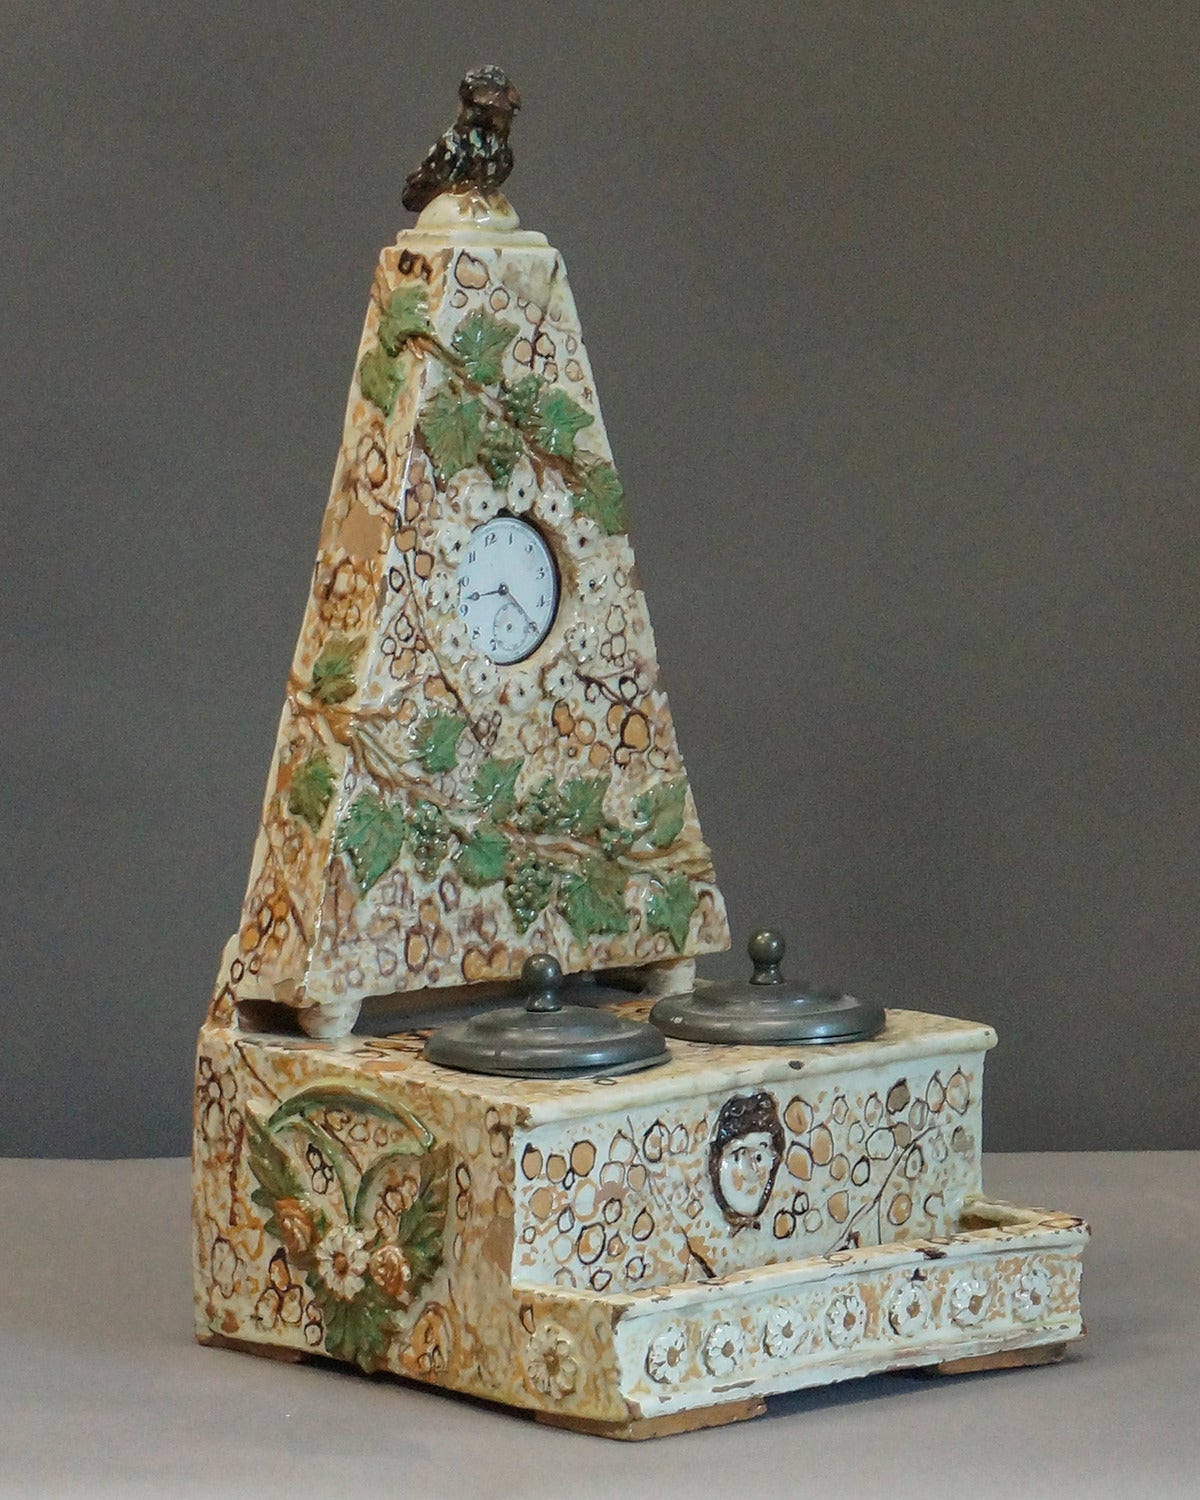 Scholar's earthenware inkwell and watch stand, Germany, circa 1780. Neoclassical details include the relief portrait of Athena and on the base and the owl finial. Opening in the back holds a pocket watch. Excellent condition with no repairs.